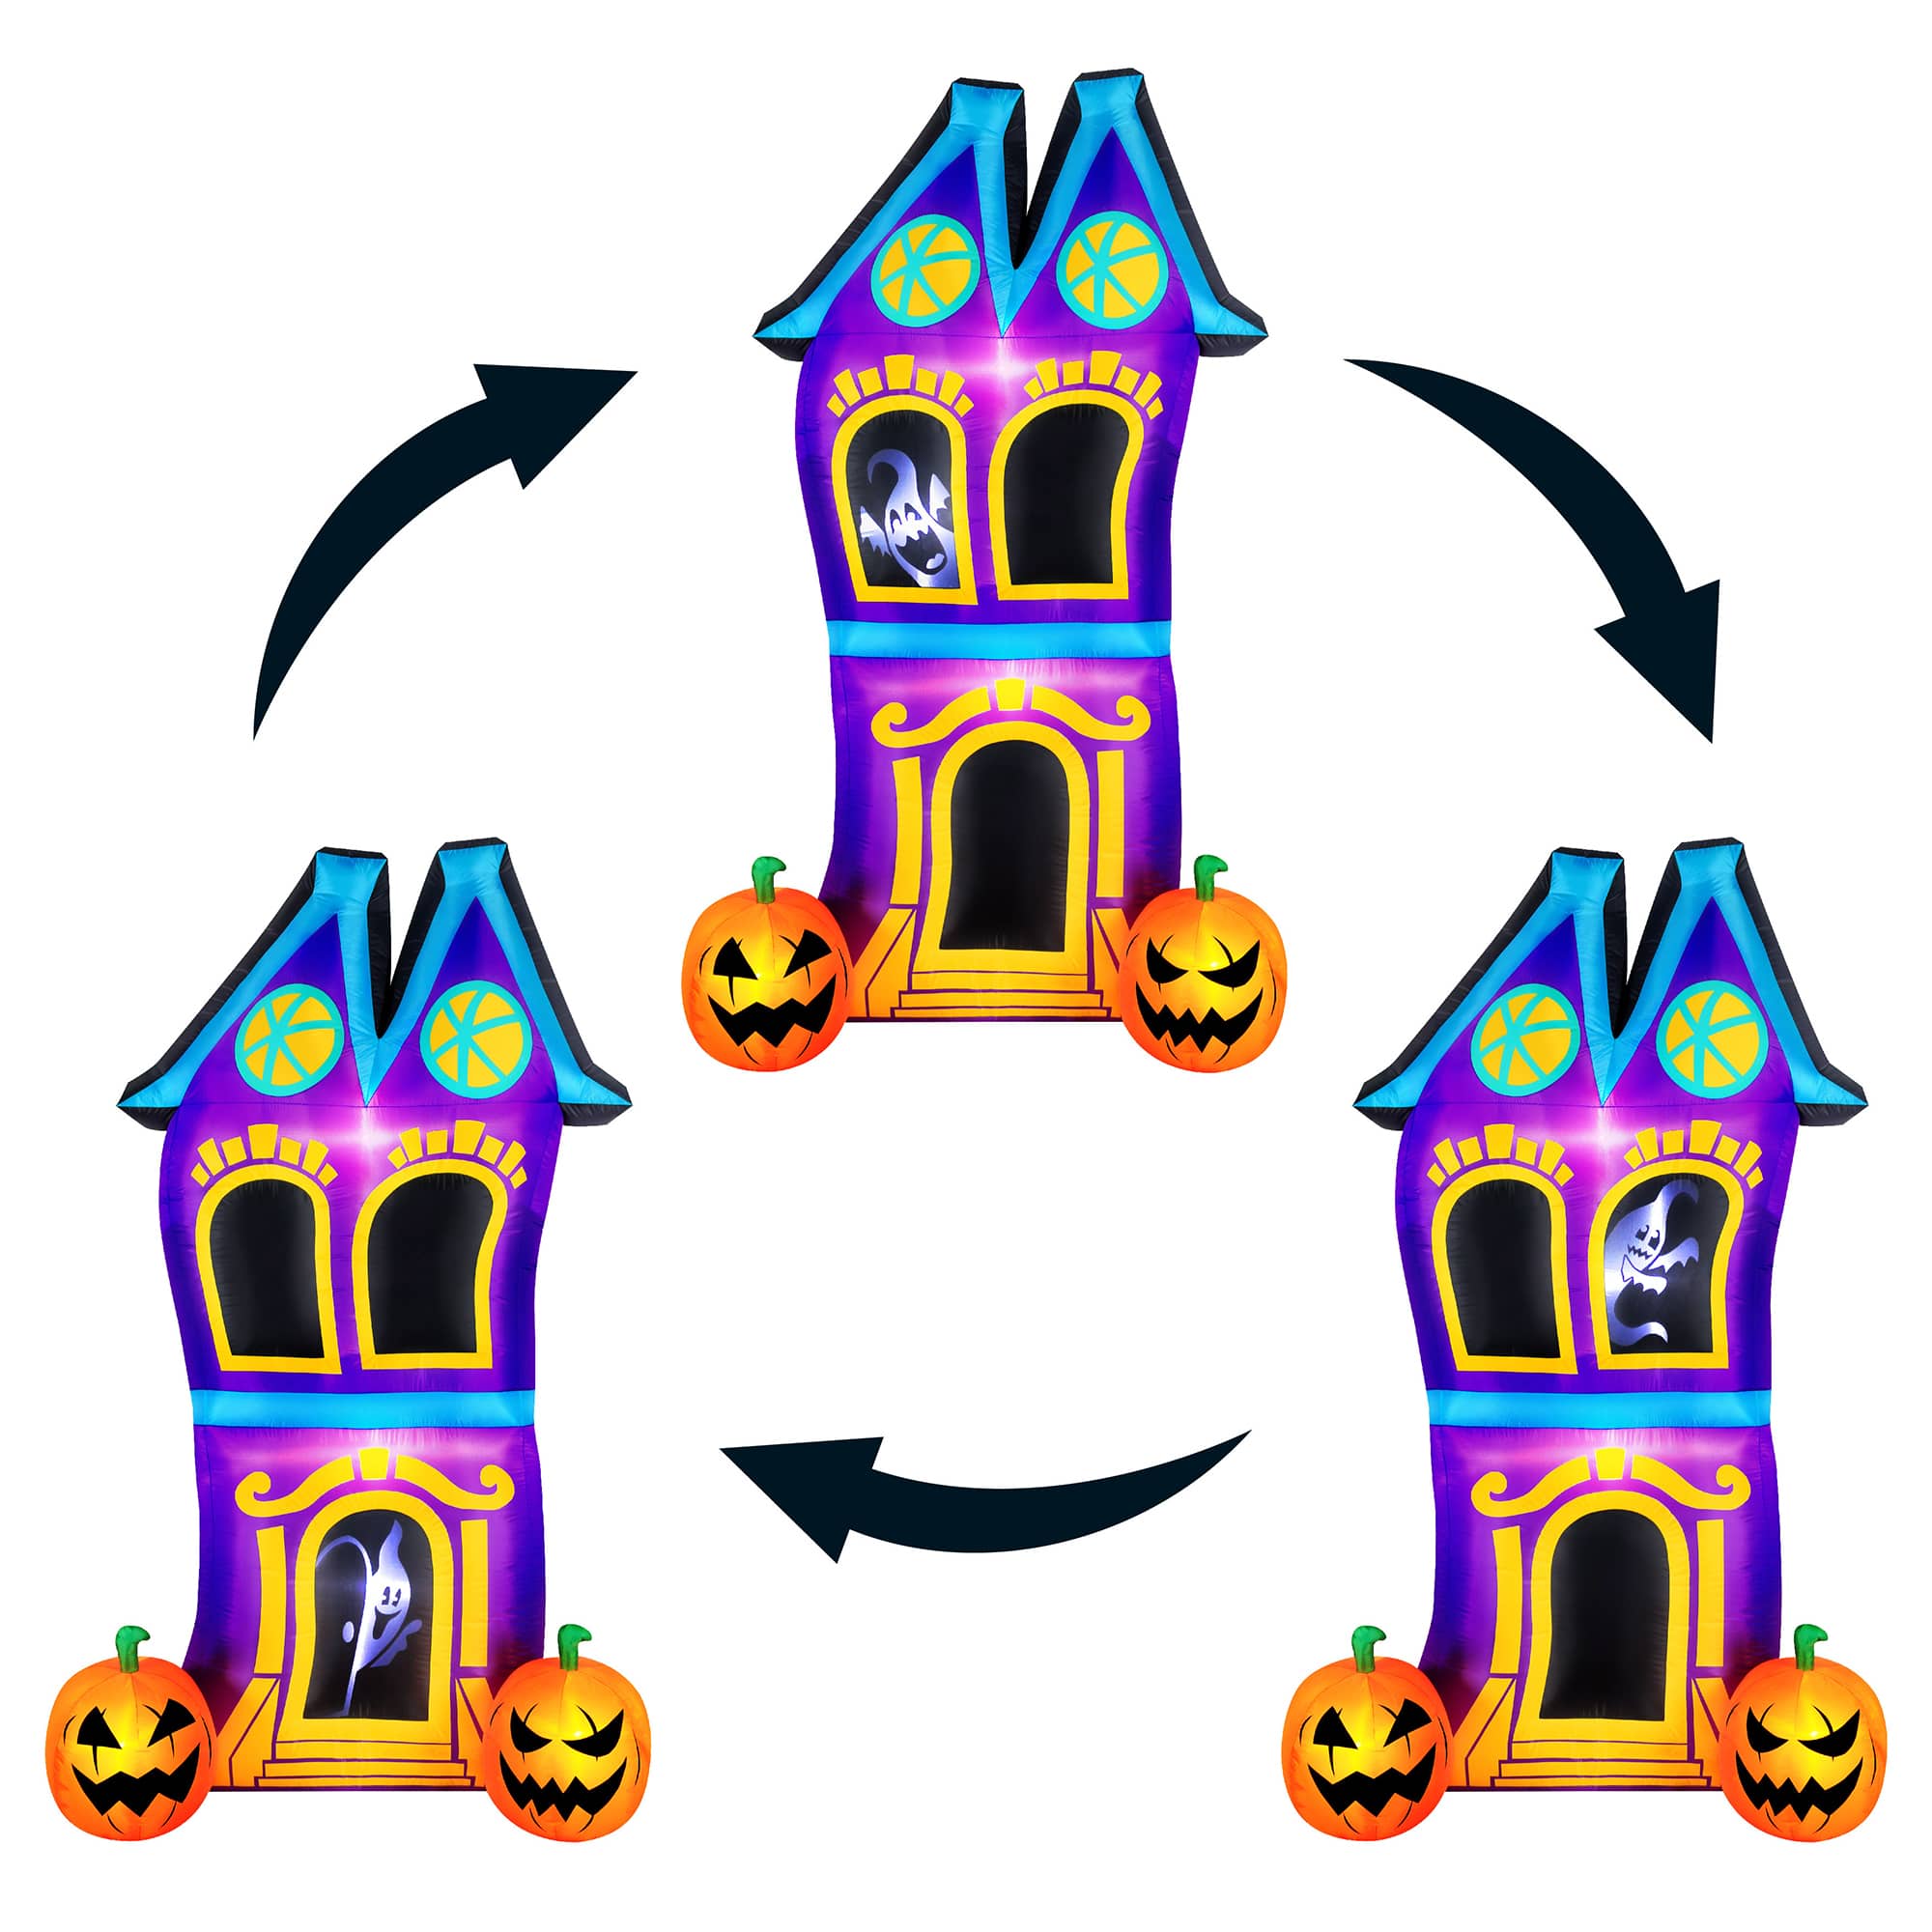 8ft. Airflowz Inflatable Halloween Haunted House with Projection Silhouette